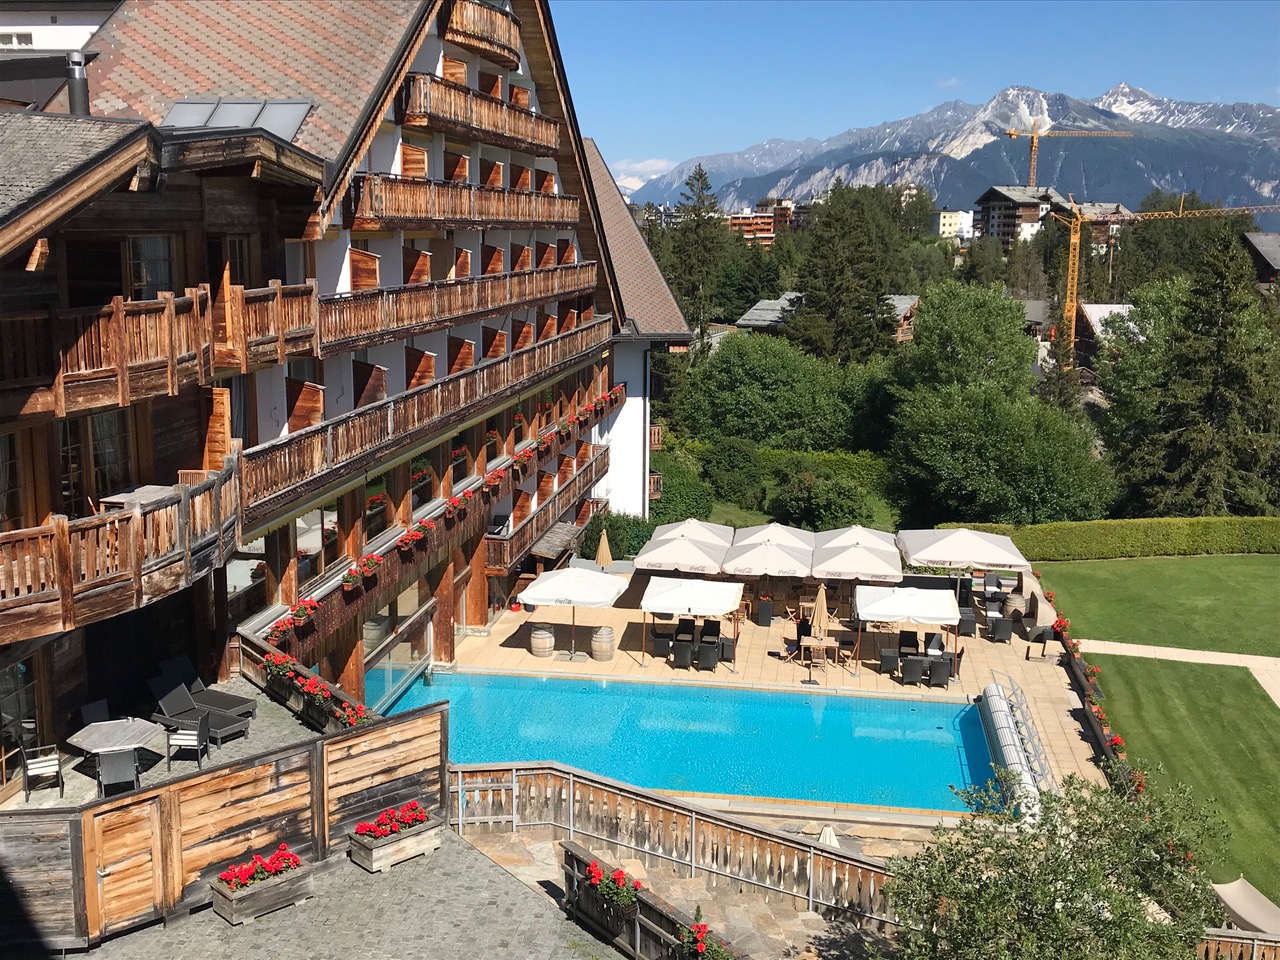 Hotel L'Etrier - its southern rooms have the views of the pool and the Alps. Photo: The-Ski-Guru.